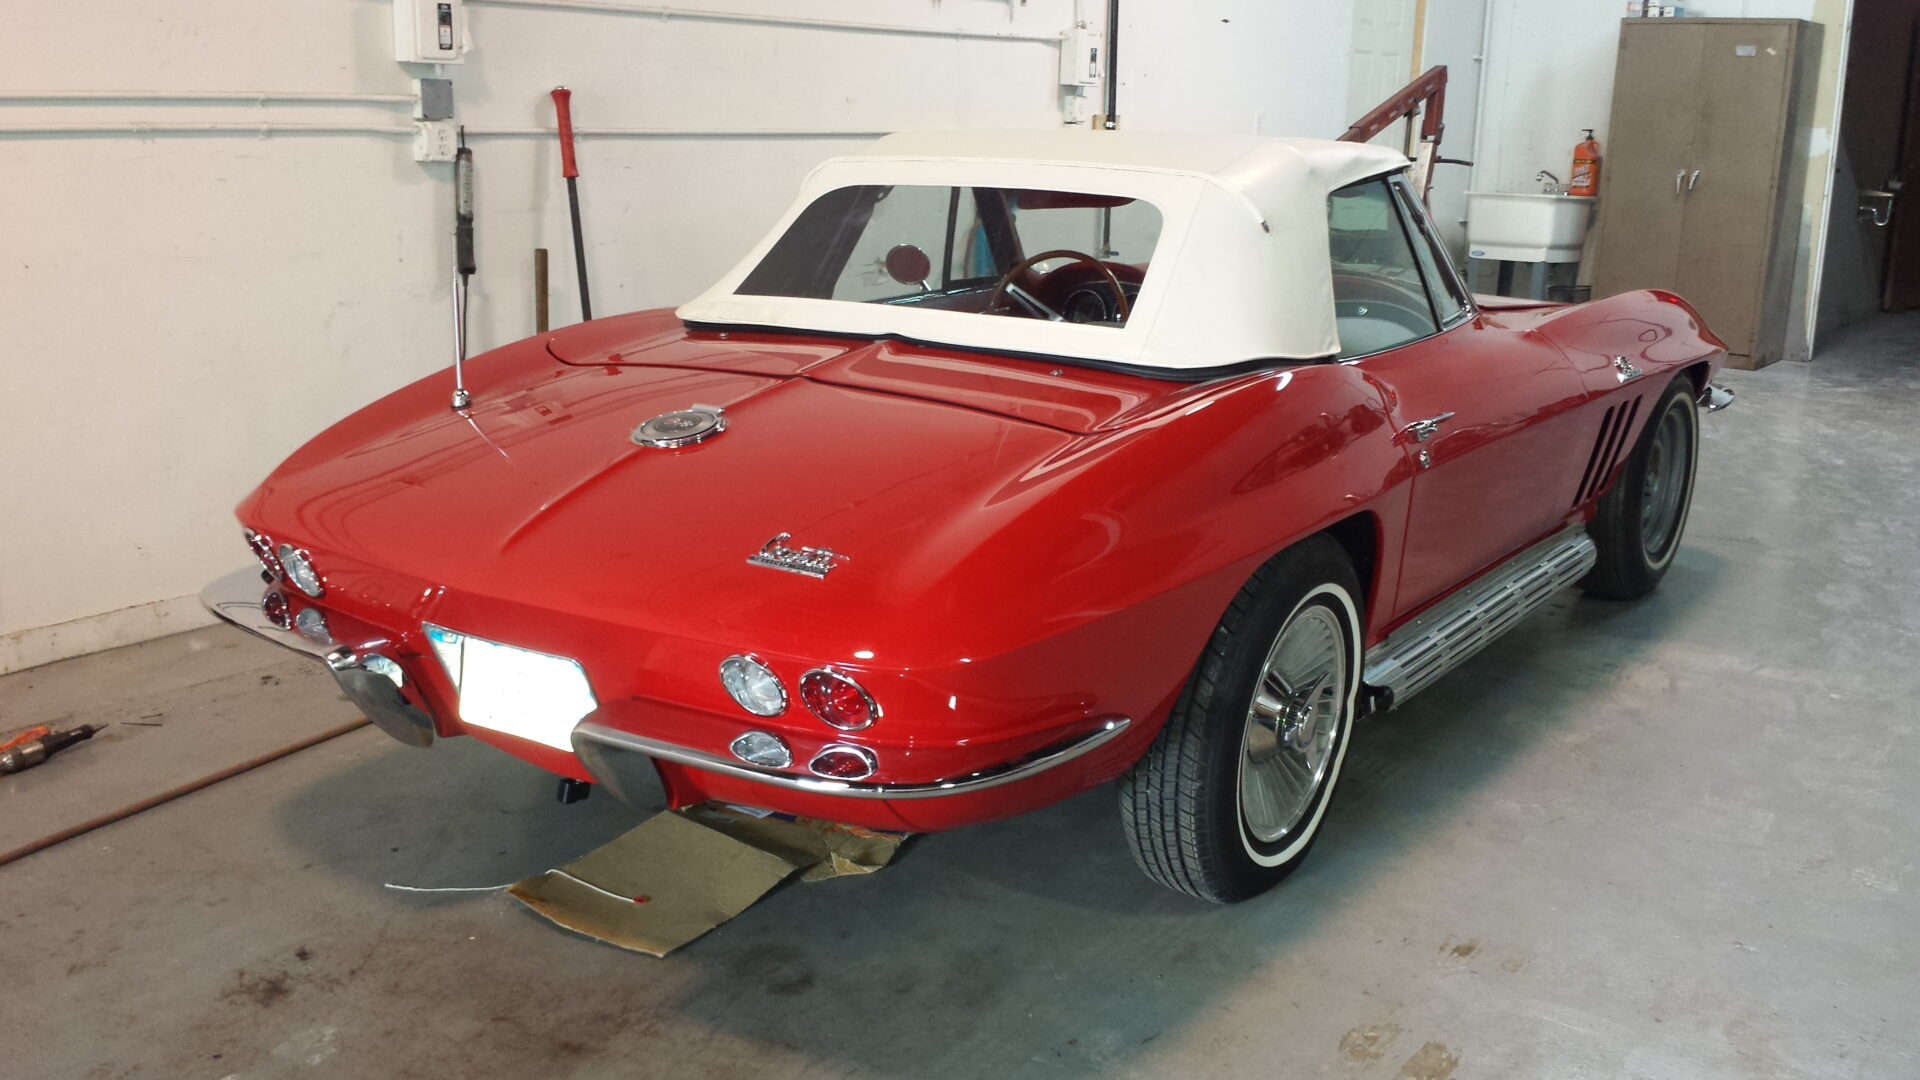 A rear view of the newly painted red 1966 Corvette